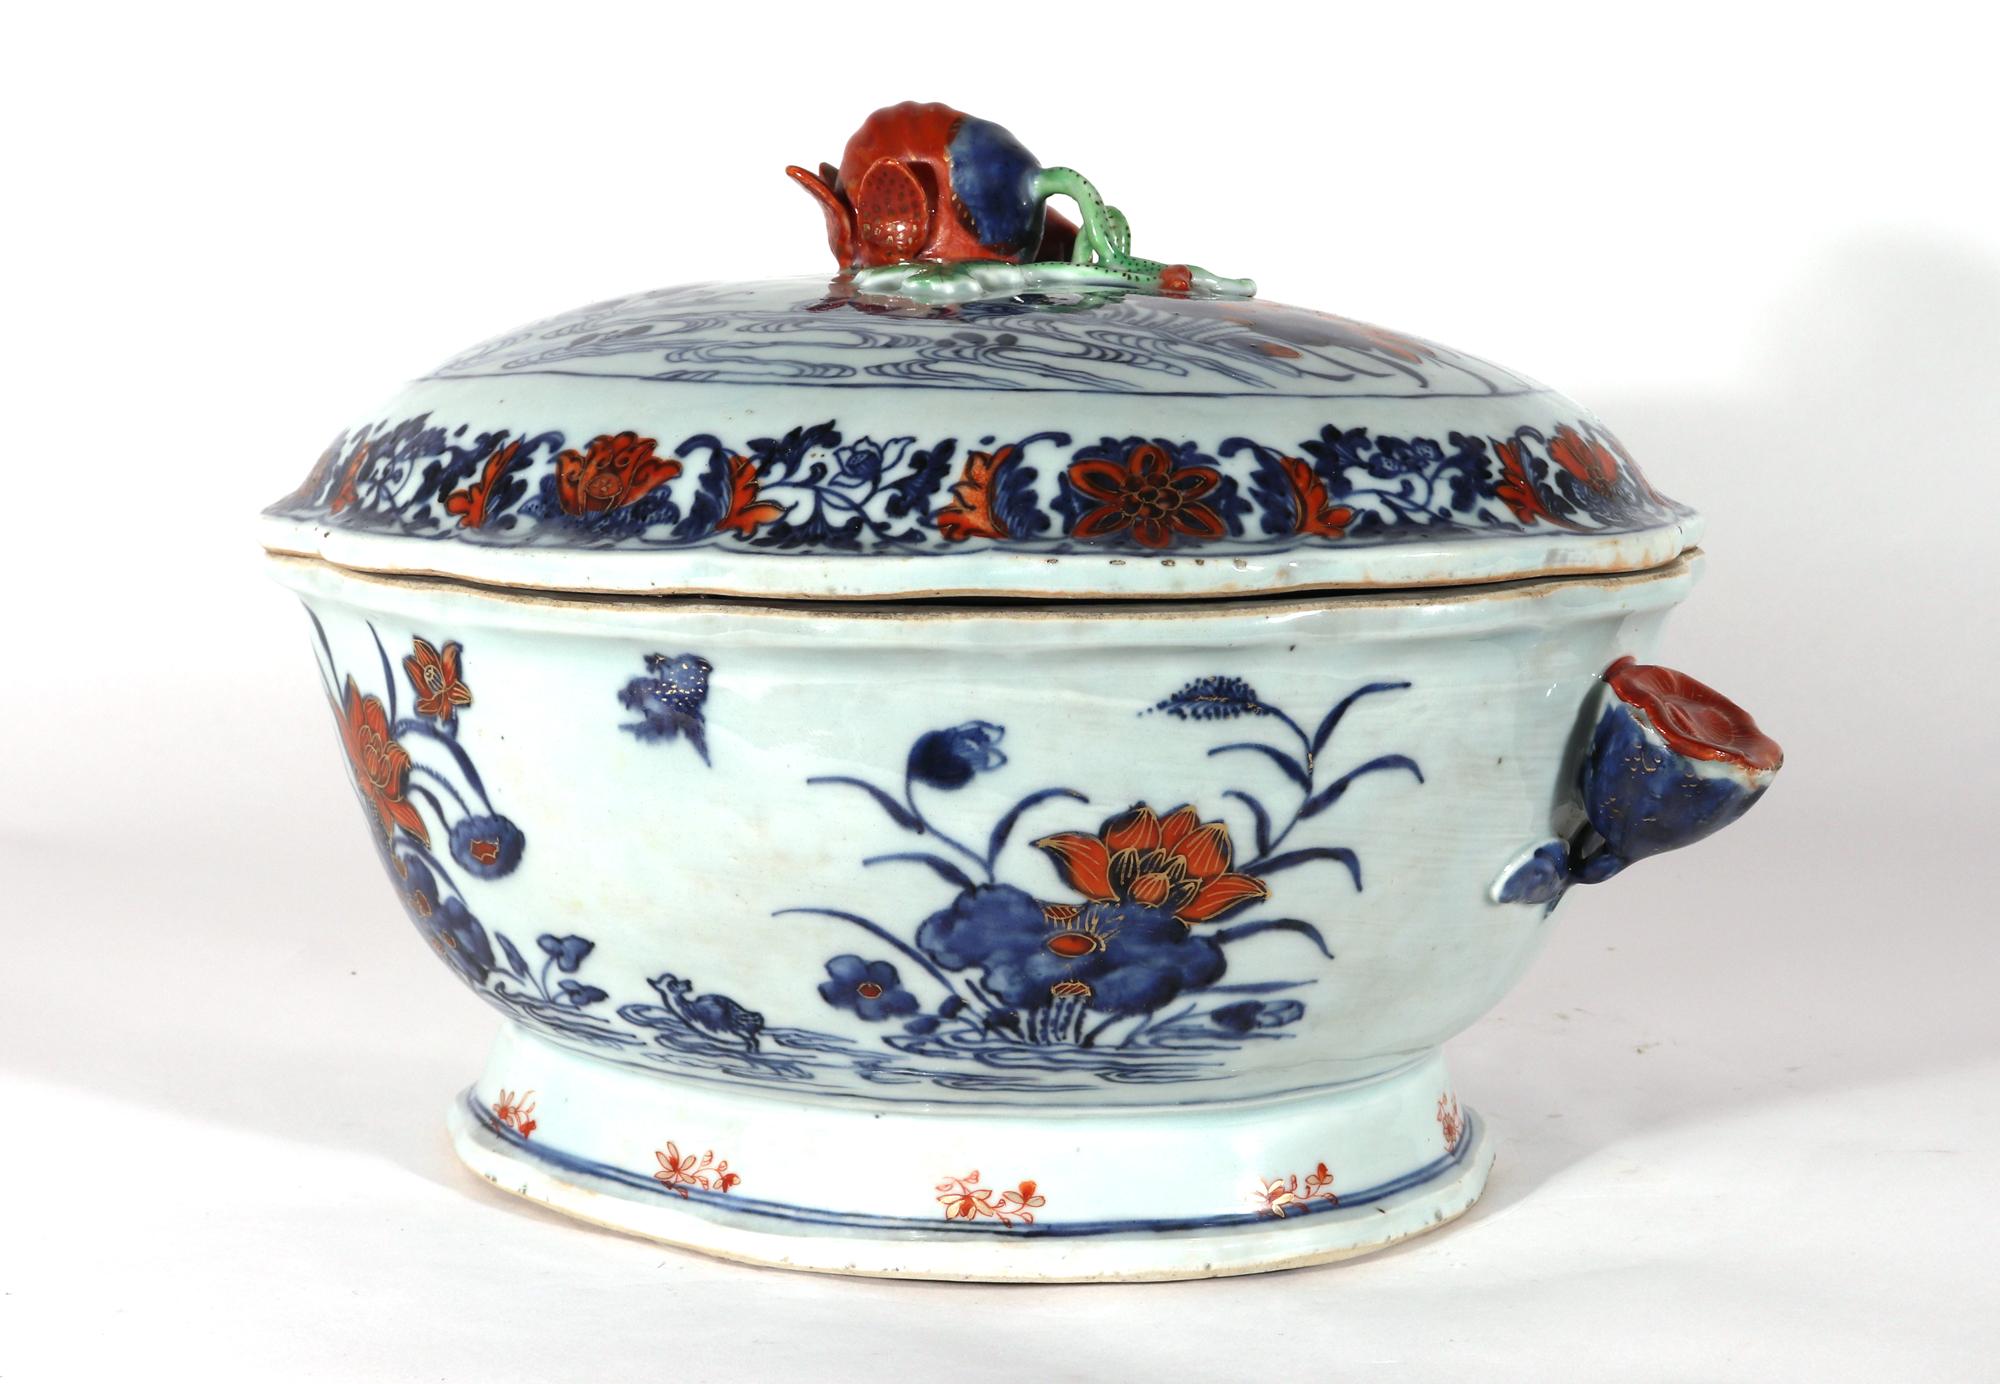 18th Century Chinese Export Porcelain Imari Tureen and Cover-Duck in Pond For Sale 3